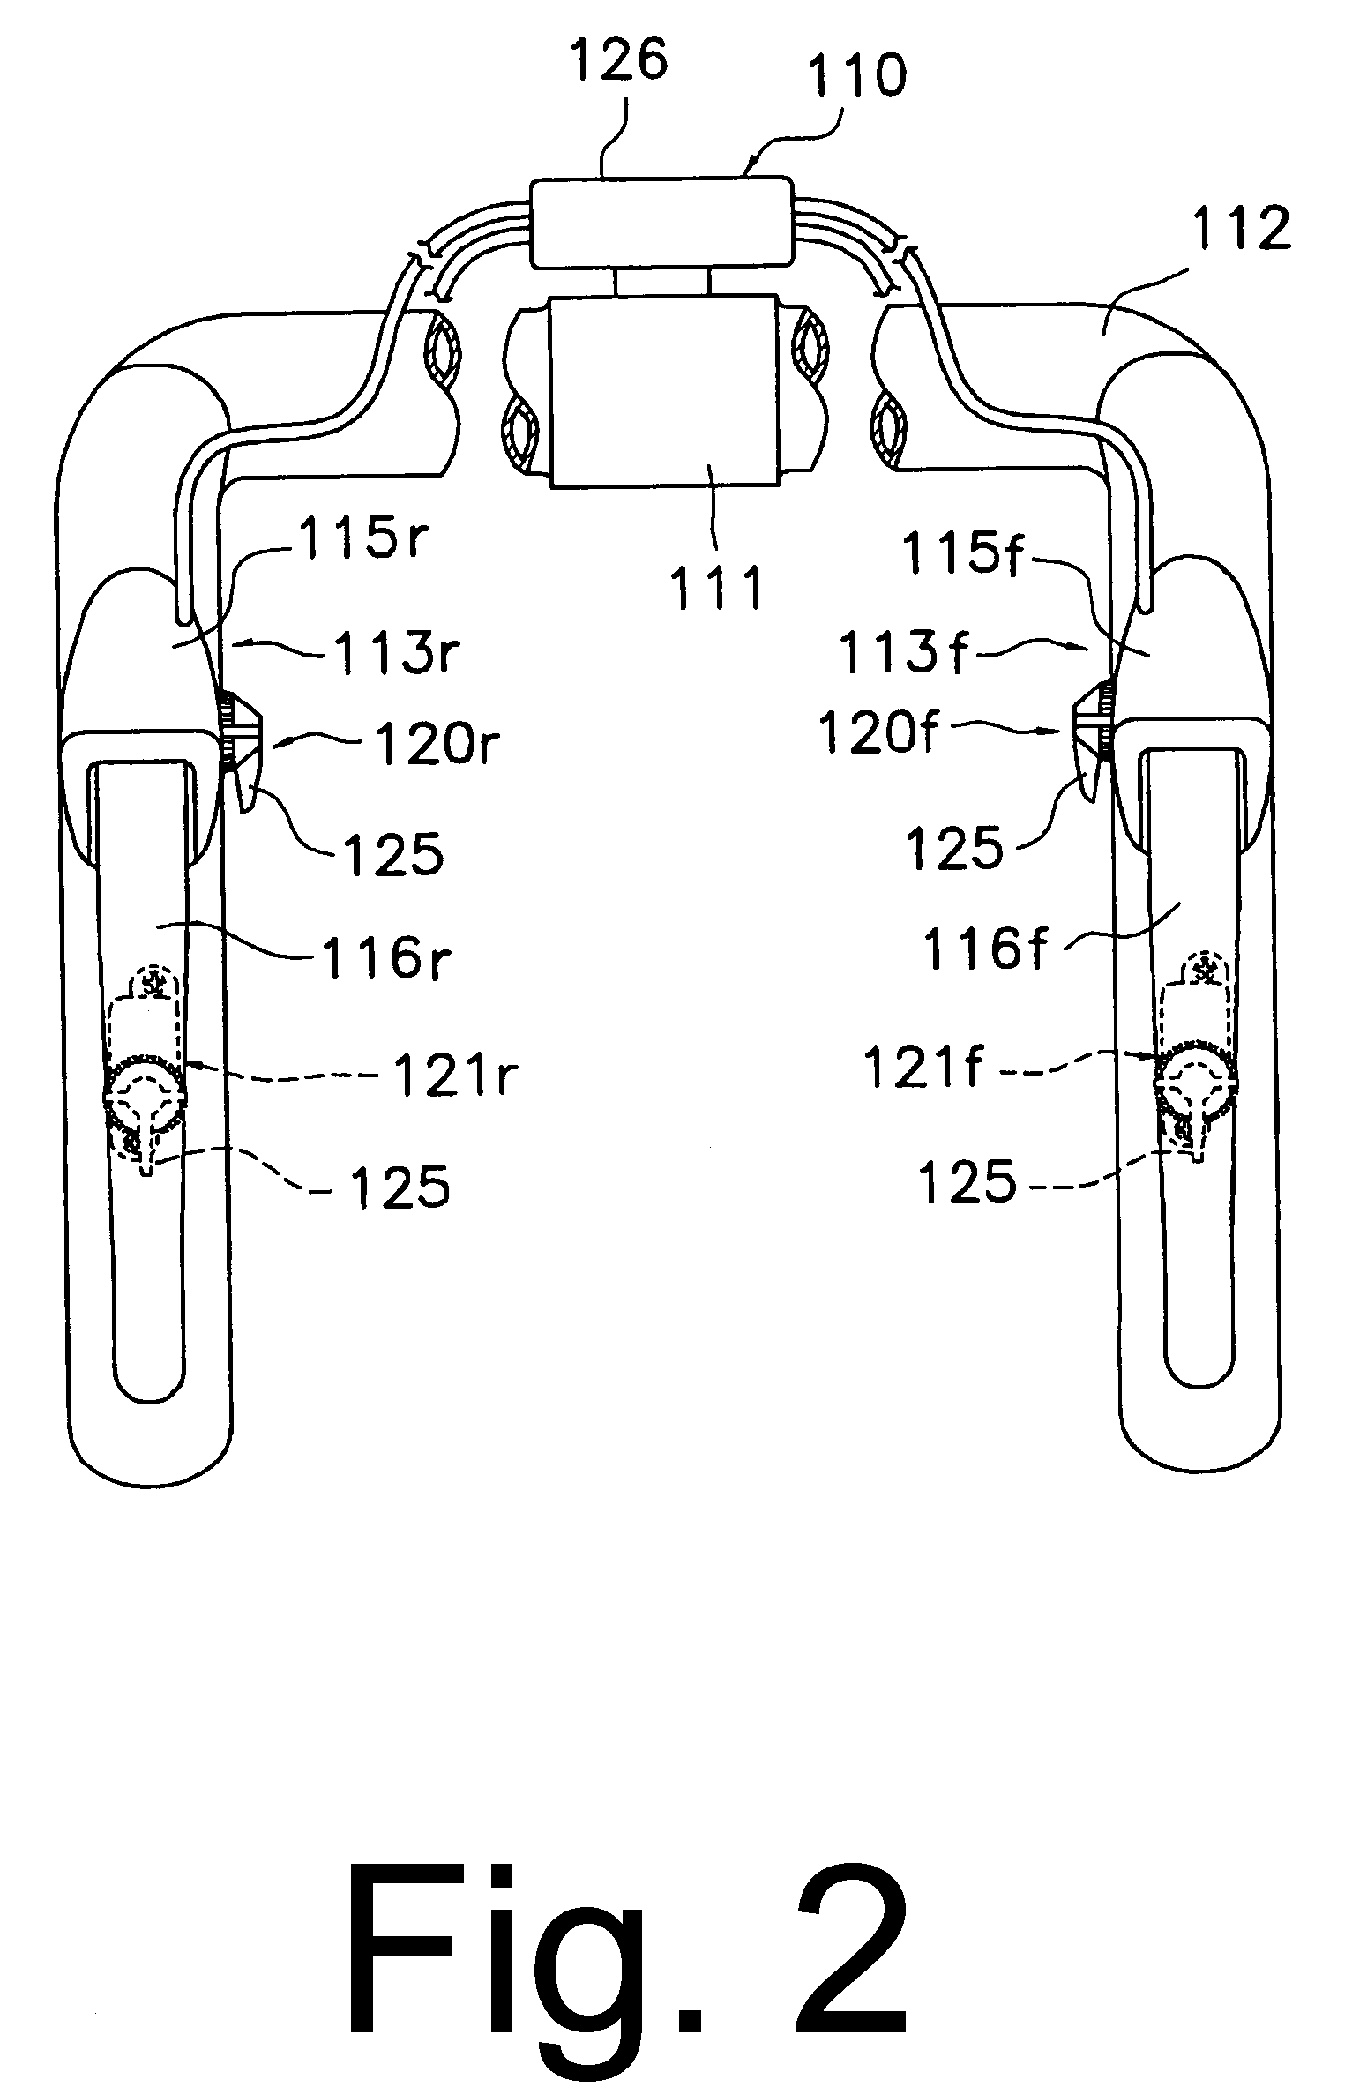 Switch designation apparatus for a bicycle control unit